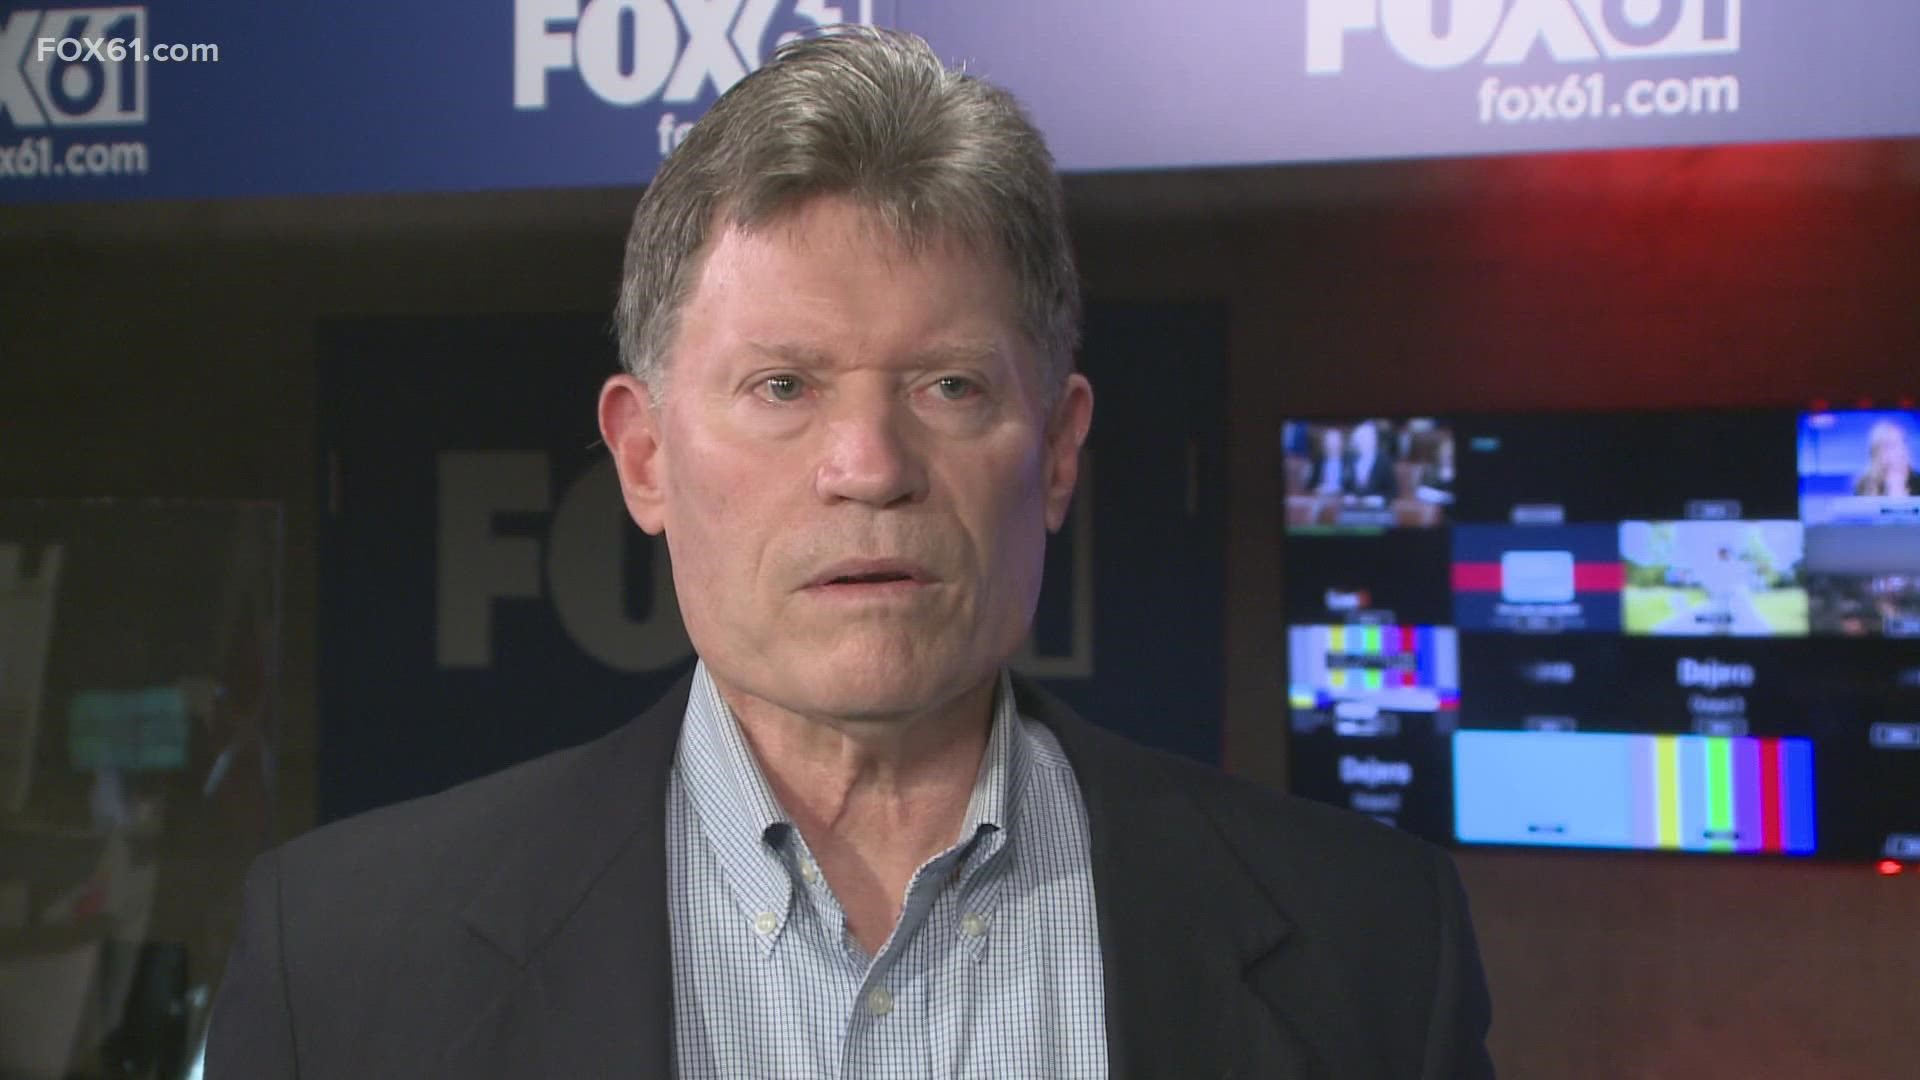 Sen. Fonfara will be running  after representing for over 36 years in House and Senate.